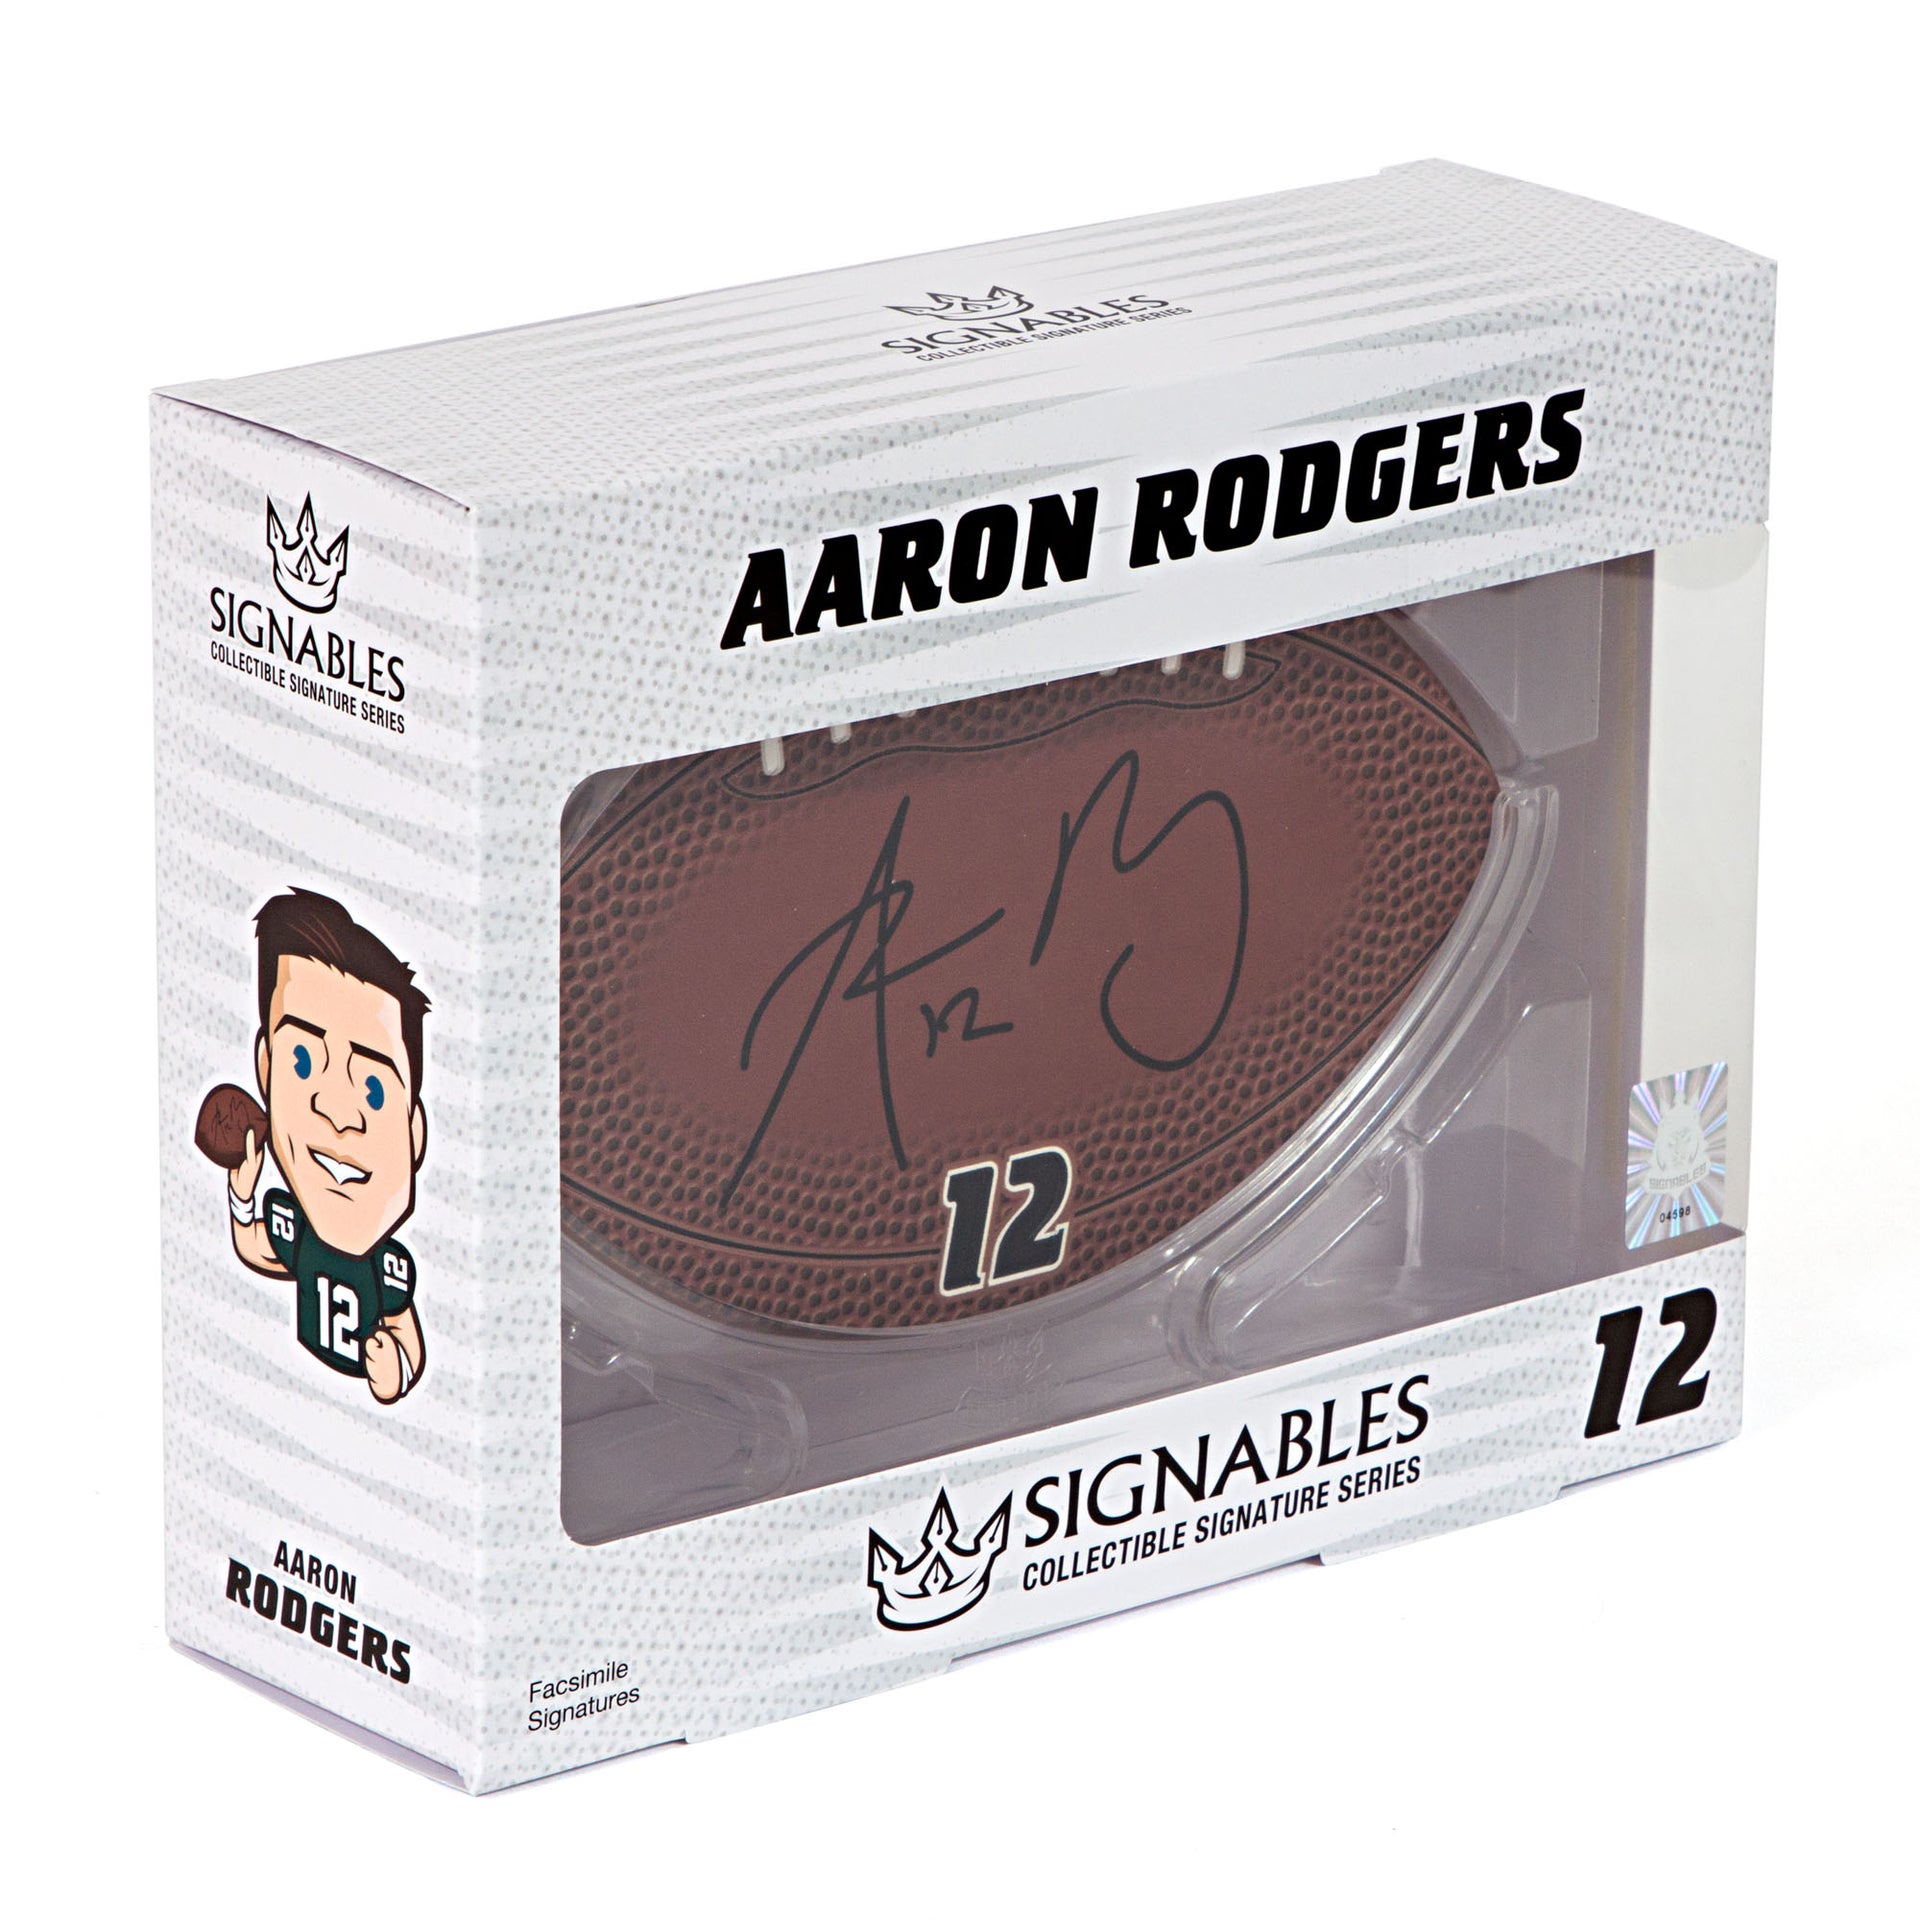 Nflpa Aaron Rodgers Signables Collectible Sports Memorabilia - White :  Target